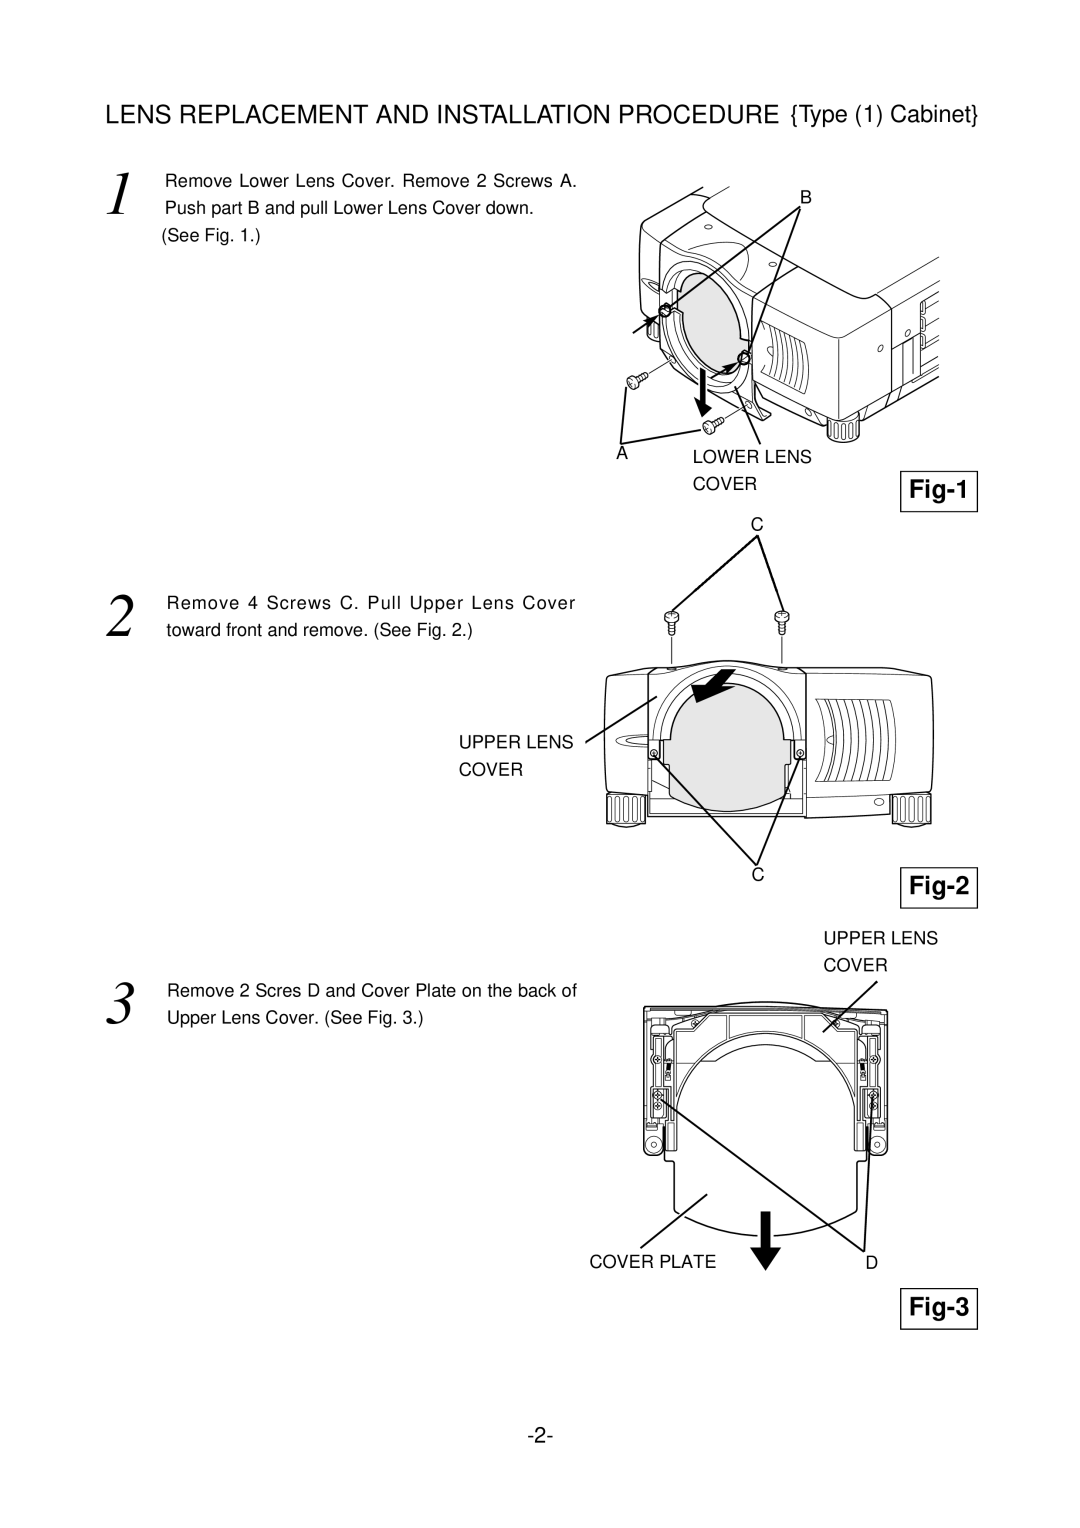 Sanyo LNS-S03 manual LENS REPLACEMENT AND INSTALLATION PROCEDURE Type 1 Cabinet, Fig-1, Fig-2, Fig-3 